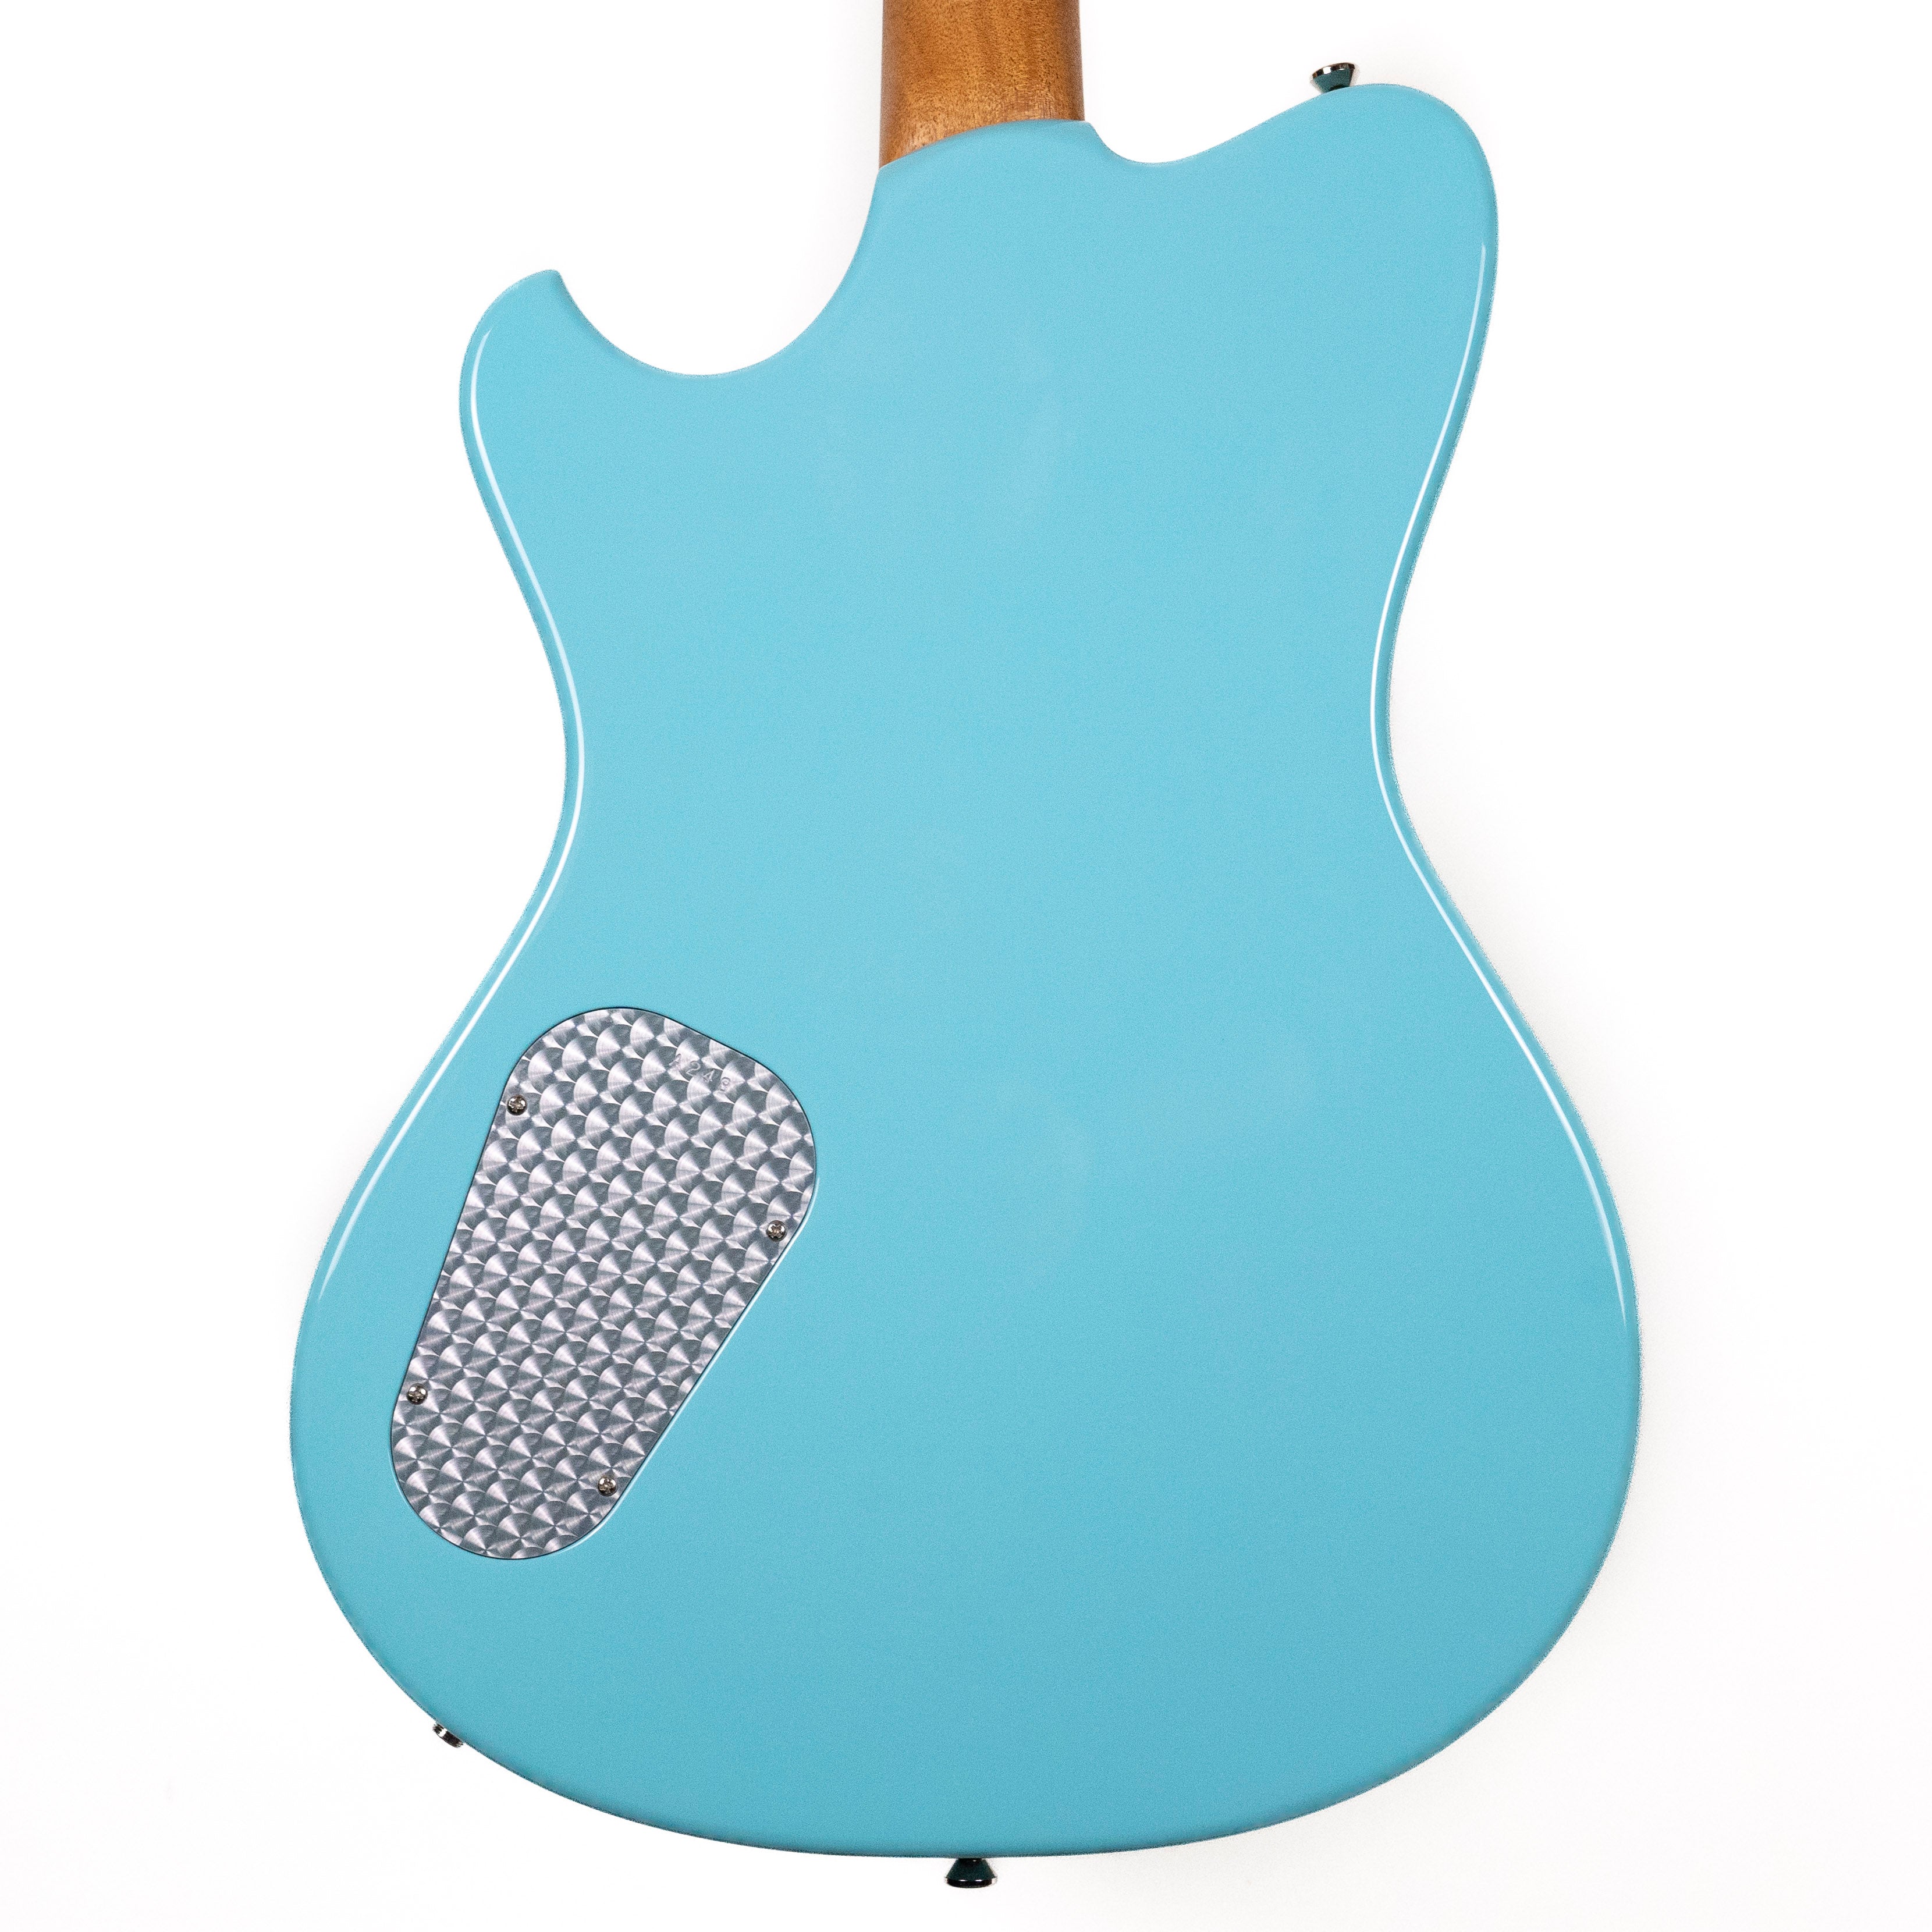 Powers Electric A-Type Larkspur Blue